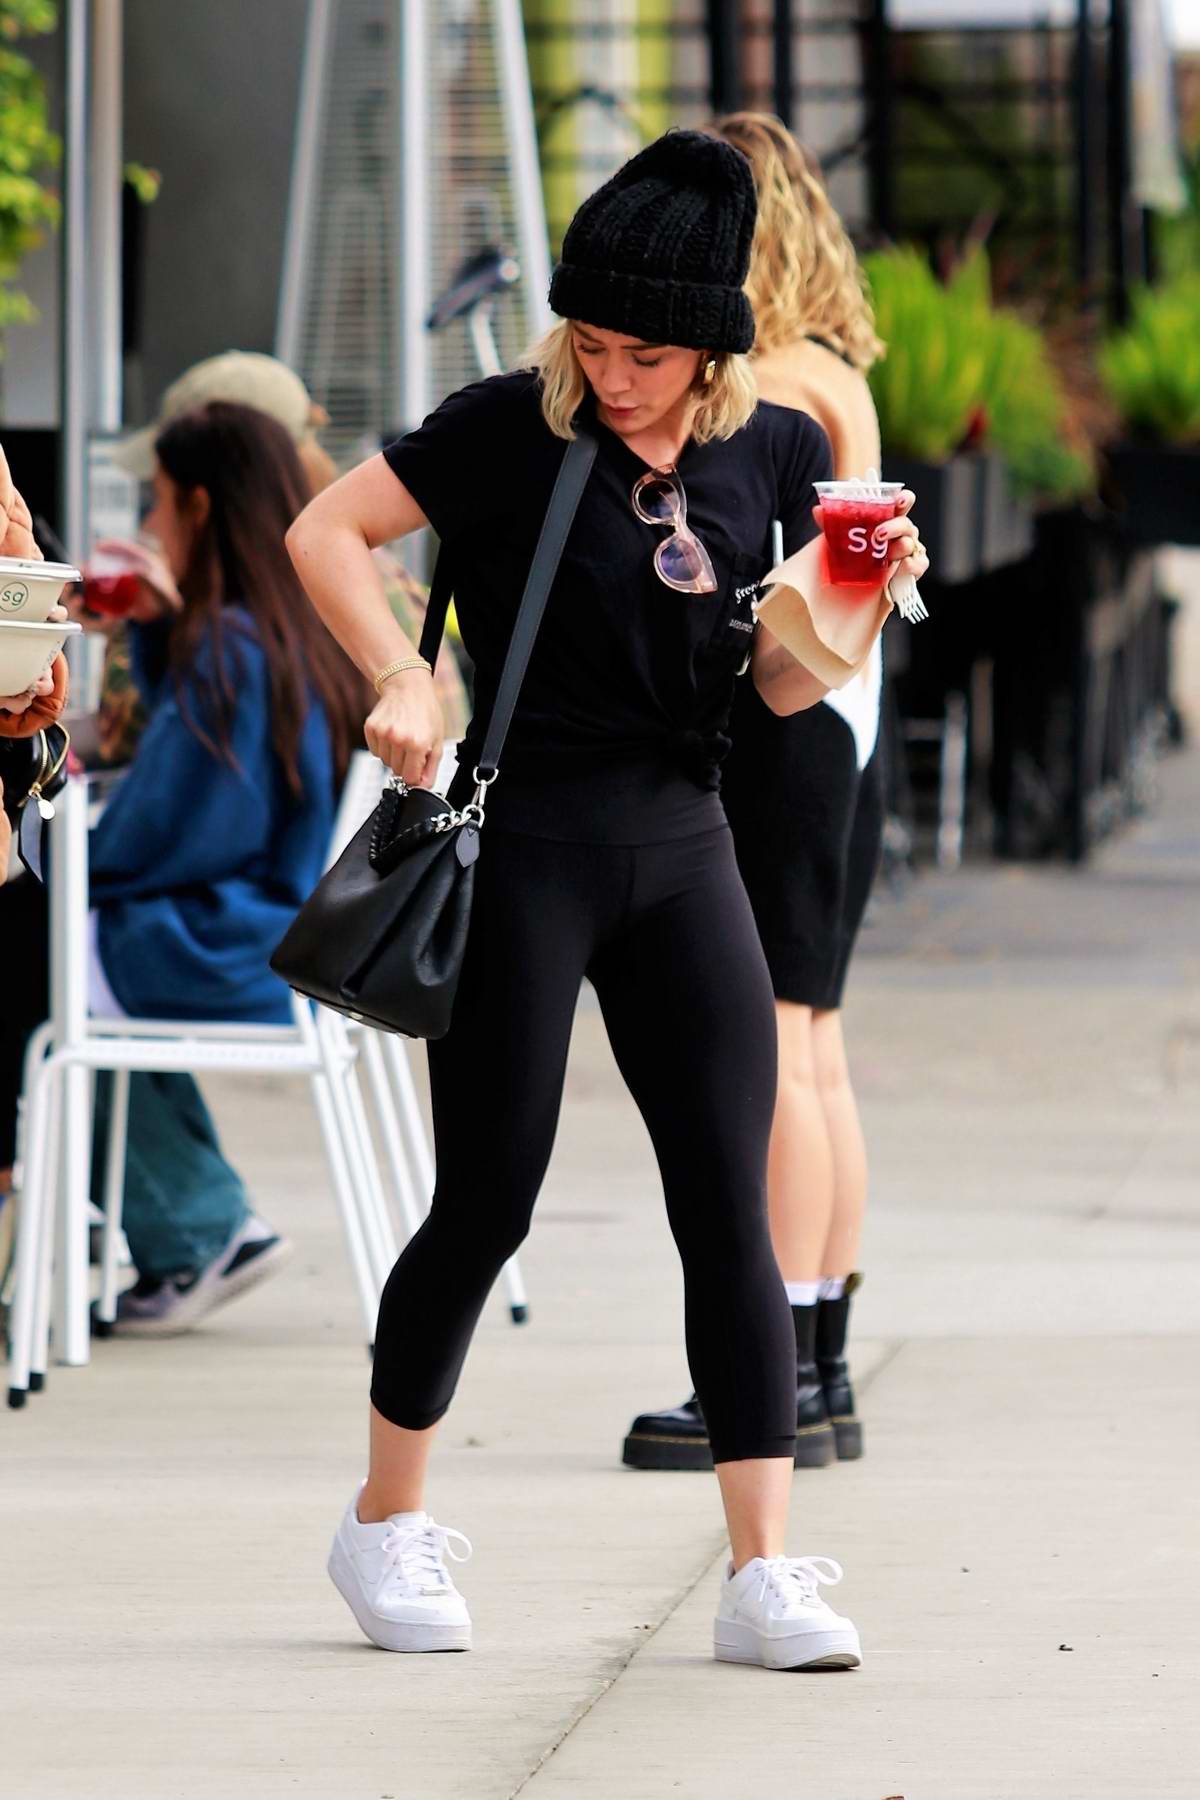 Hilary Duff is all smiles in athletic wear as she grabs lunch on the go  near Studio City